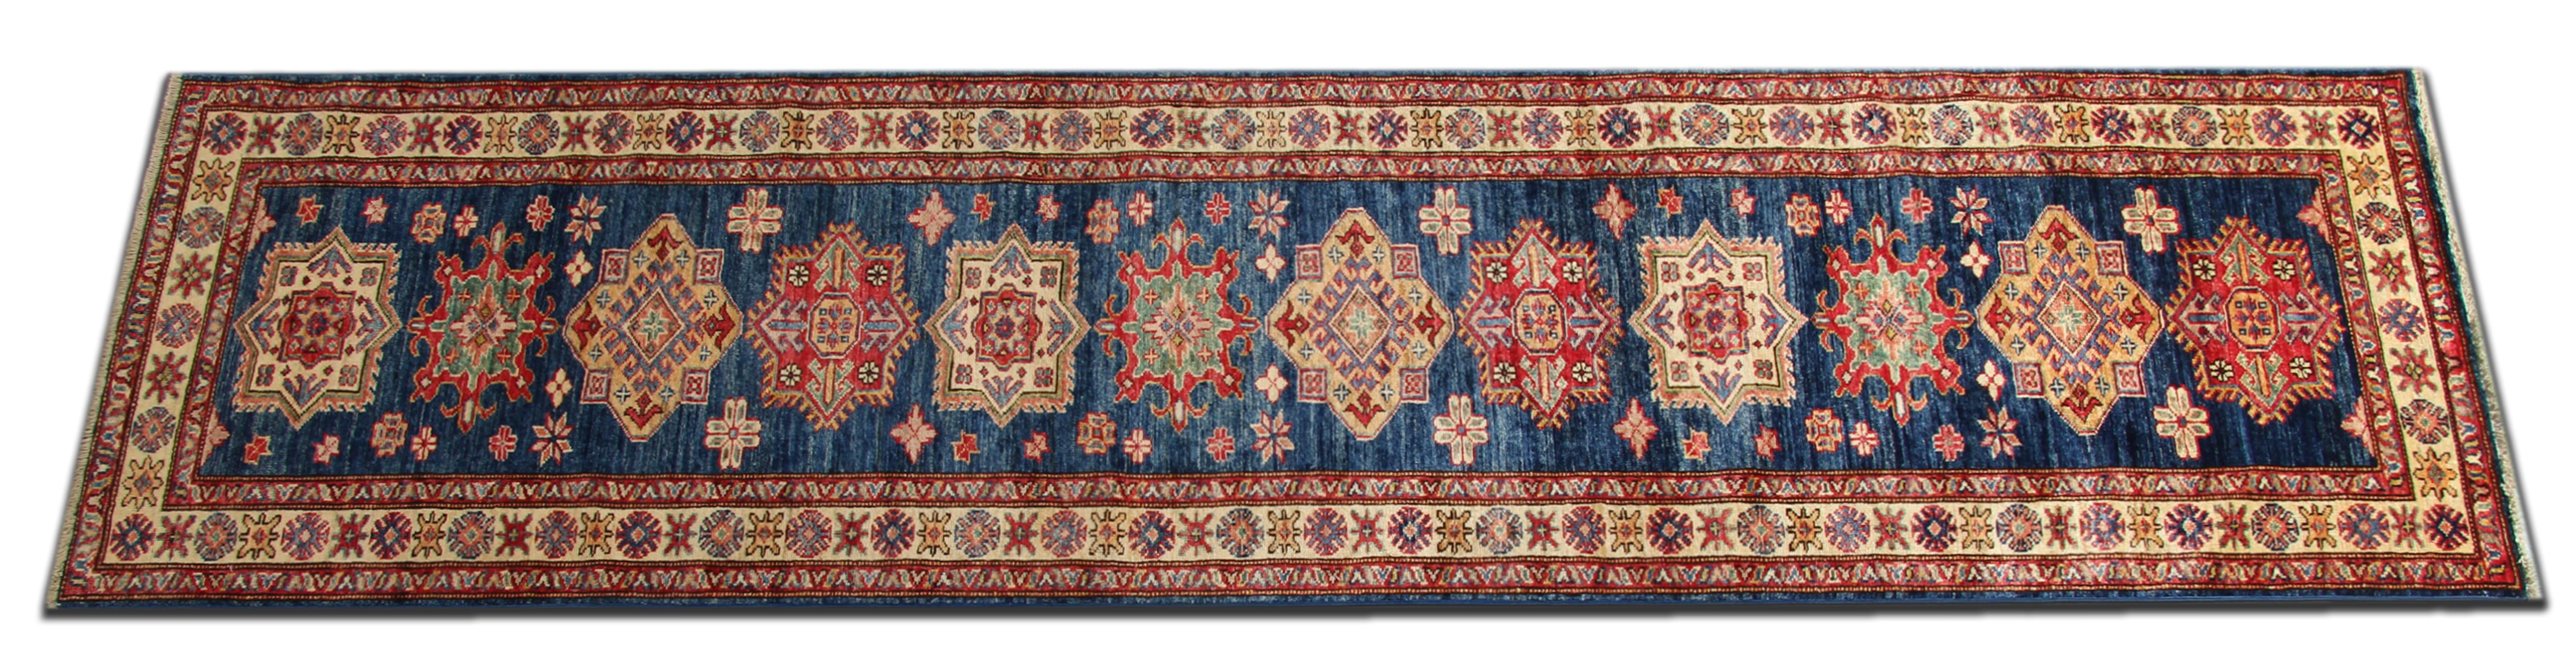 This handmade flat-weave motif rug comes in a striking color combination. This blue rug has bright red, navy, light blue, sea blue, cream and caramel colors. The pattern depicted on this woven rug has been influenced by
Caucasian designs. This New,